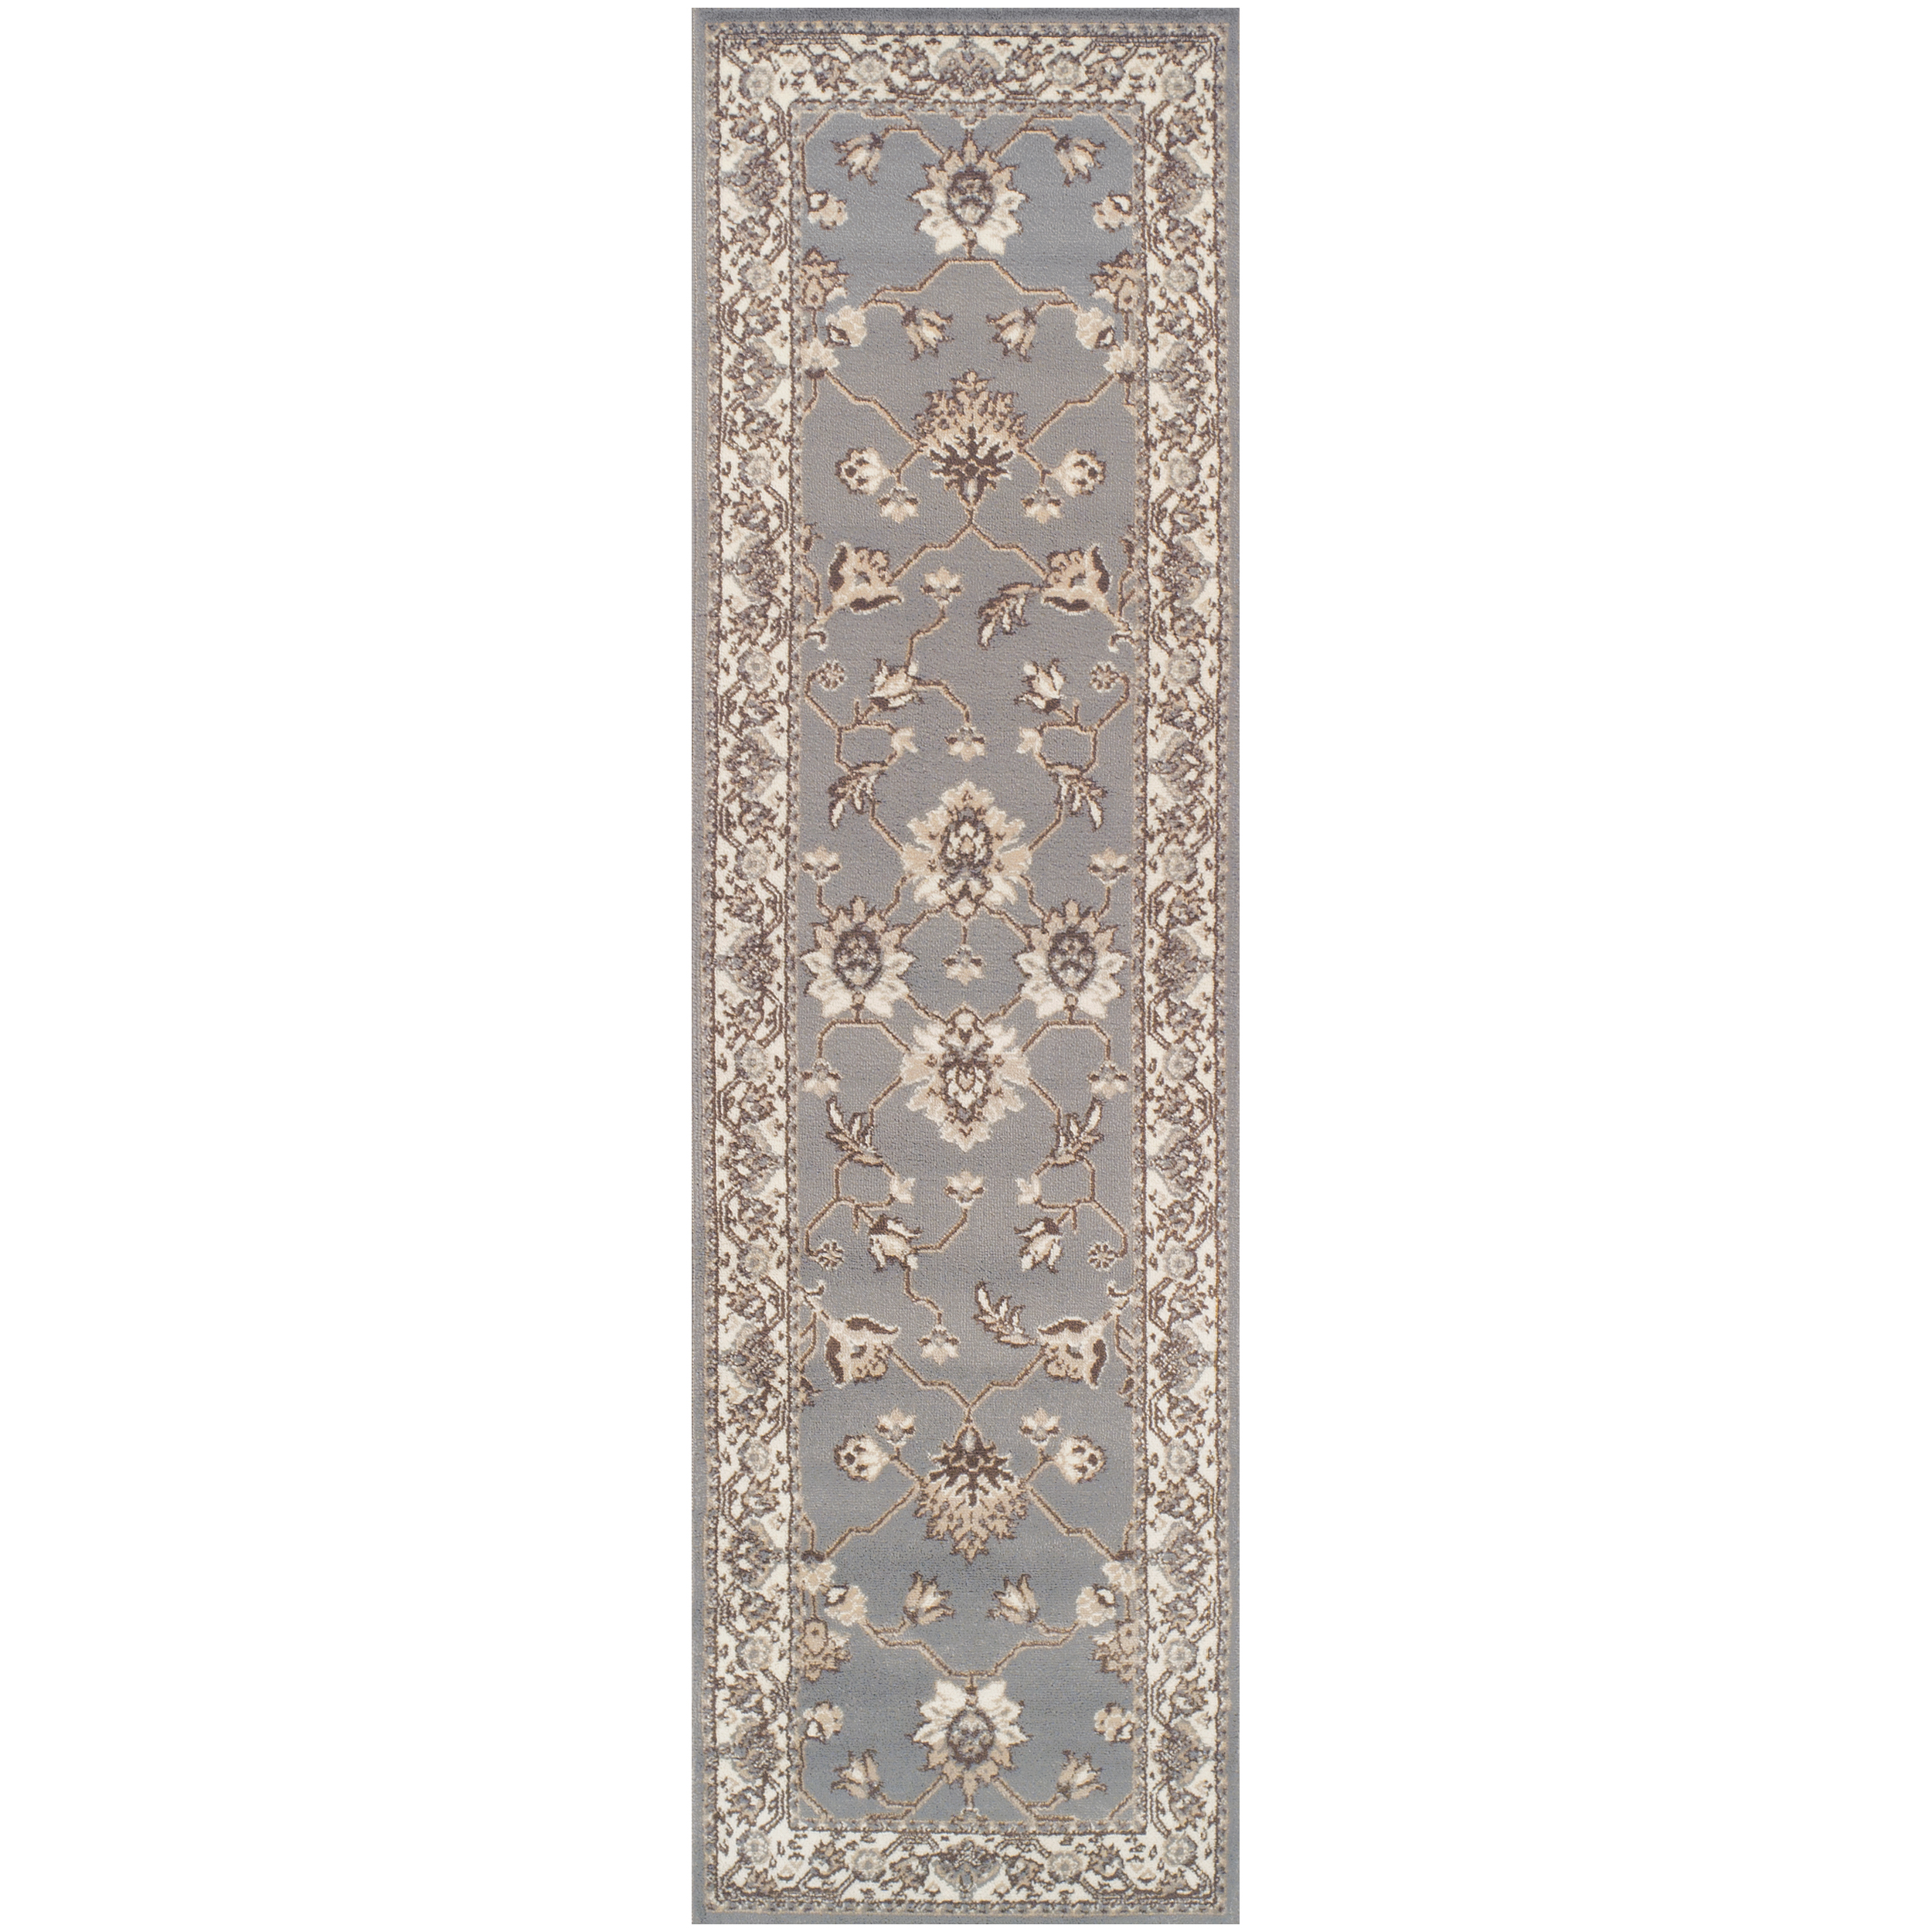 Kingfield Designer Area Rug Collection - image 2 of 3